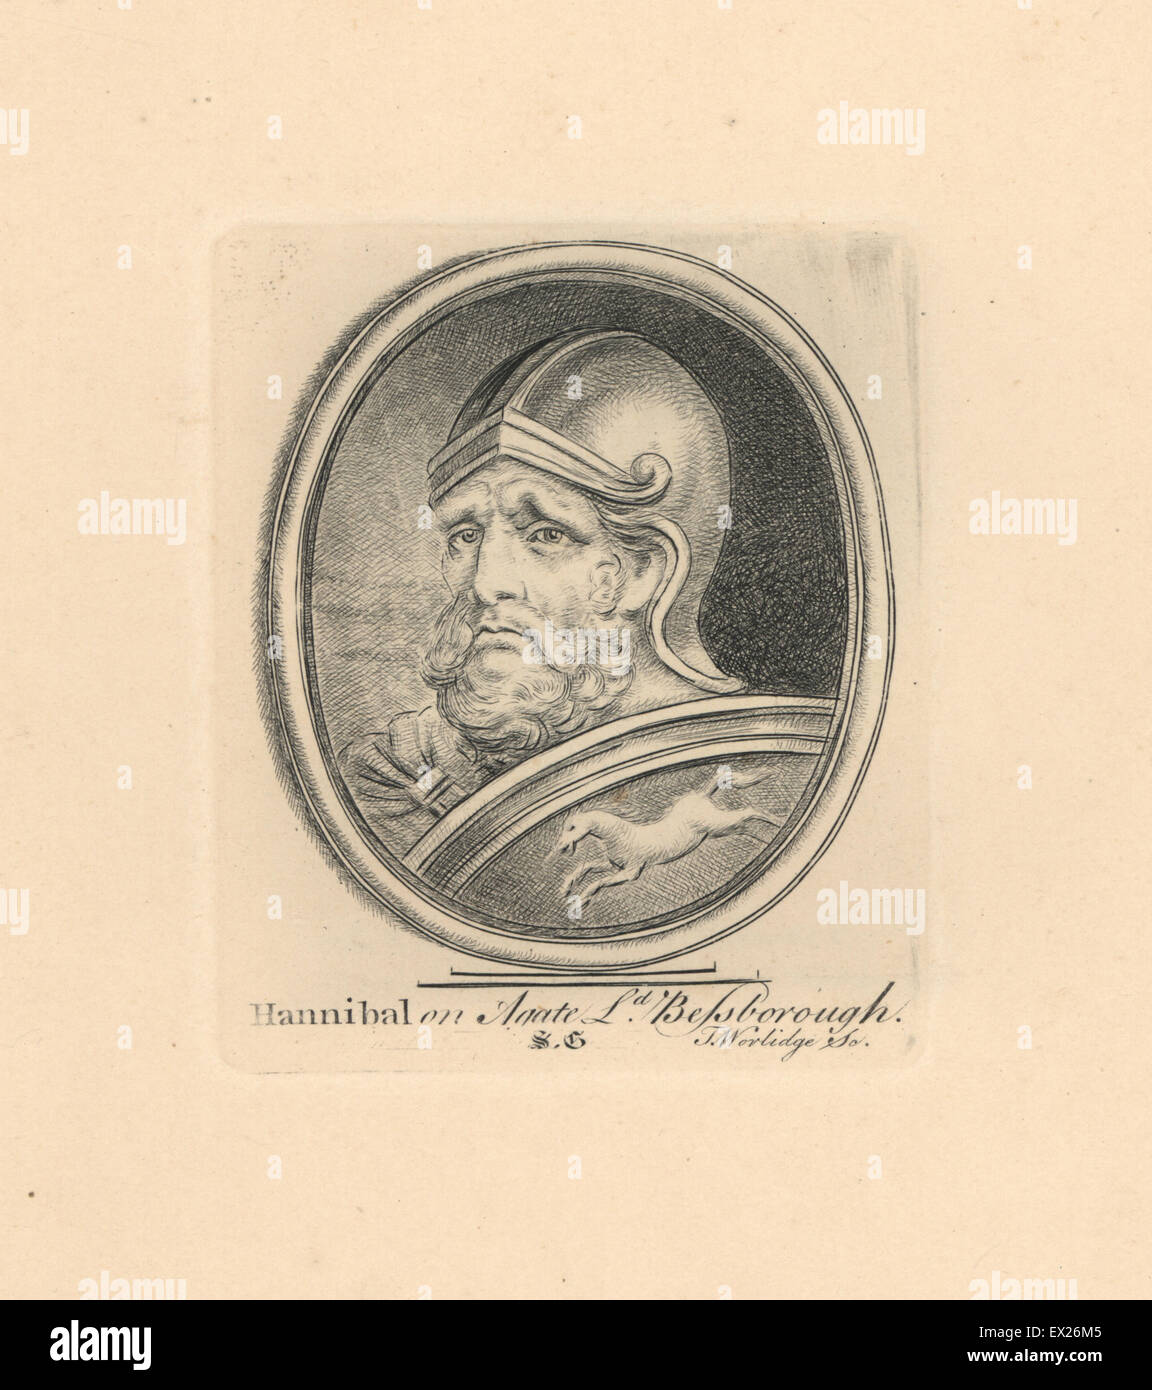 Portrait of Hannibal Barca, Punic Cathagian general, engraved on agate in the collection of Lord Bessborough. Copperplate engraving by Thomas Worlidge from James Vallentin's One Hundred and Eight Engravings from Antique Gems, 1863. Stock Photo